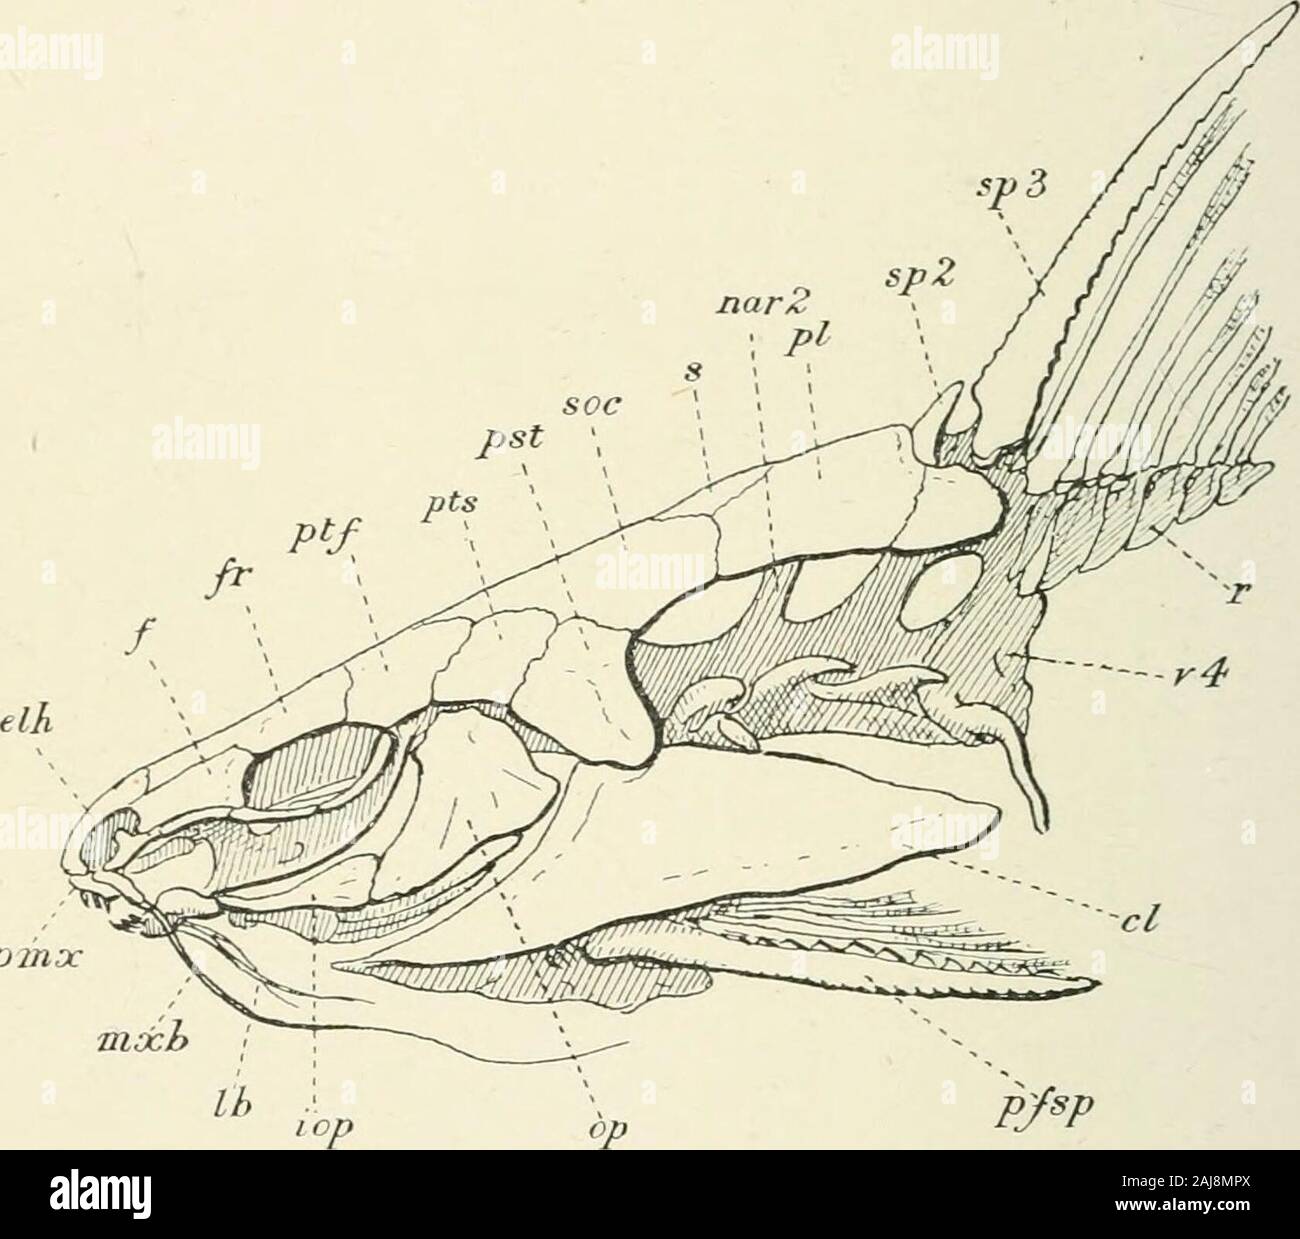 A treatise on zoology . Fig. 305. Auchenoglanis hiscutatis, Geottr. A, ventralview of the pectoral girdle and left pectoral fin.LJ, ventral view of the pelvic girdle and leftpelvic fin. dt, eleithrnm ; eo, coracoid ; msc,mesocoracoid ; jj, pelvic bone ; pf, pelvic lepido-trichia ; s/), pectoral spine or first lepidotrich. 38o TELEOSTEI cavity below the trunk-muscles and acts as a lung (Fig. 369)(Burne [75]). Sub-Family Diplomystacix^. In which tlie maxilla is still toothed,and of considerable size. Diplomystax {Diplomystes), Dum. ; Chile. Sub-Family Clariinae. Clarias, Gron.; Heterobranclms, S Stock Photo